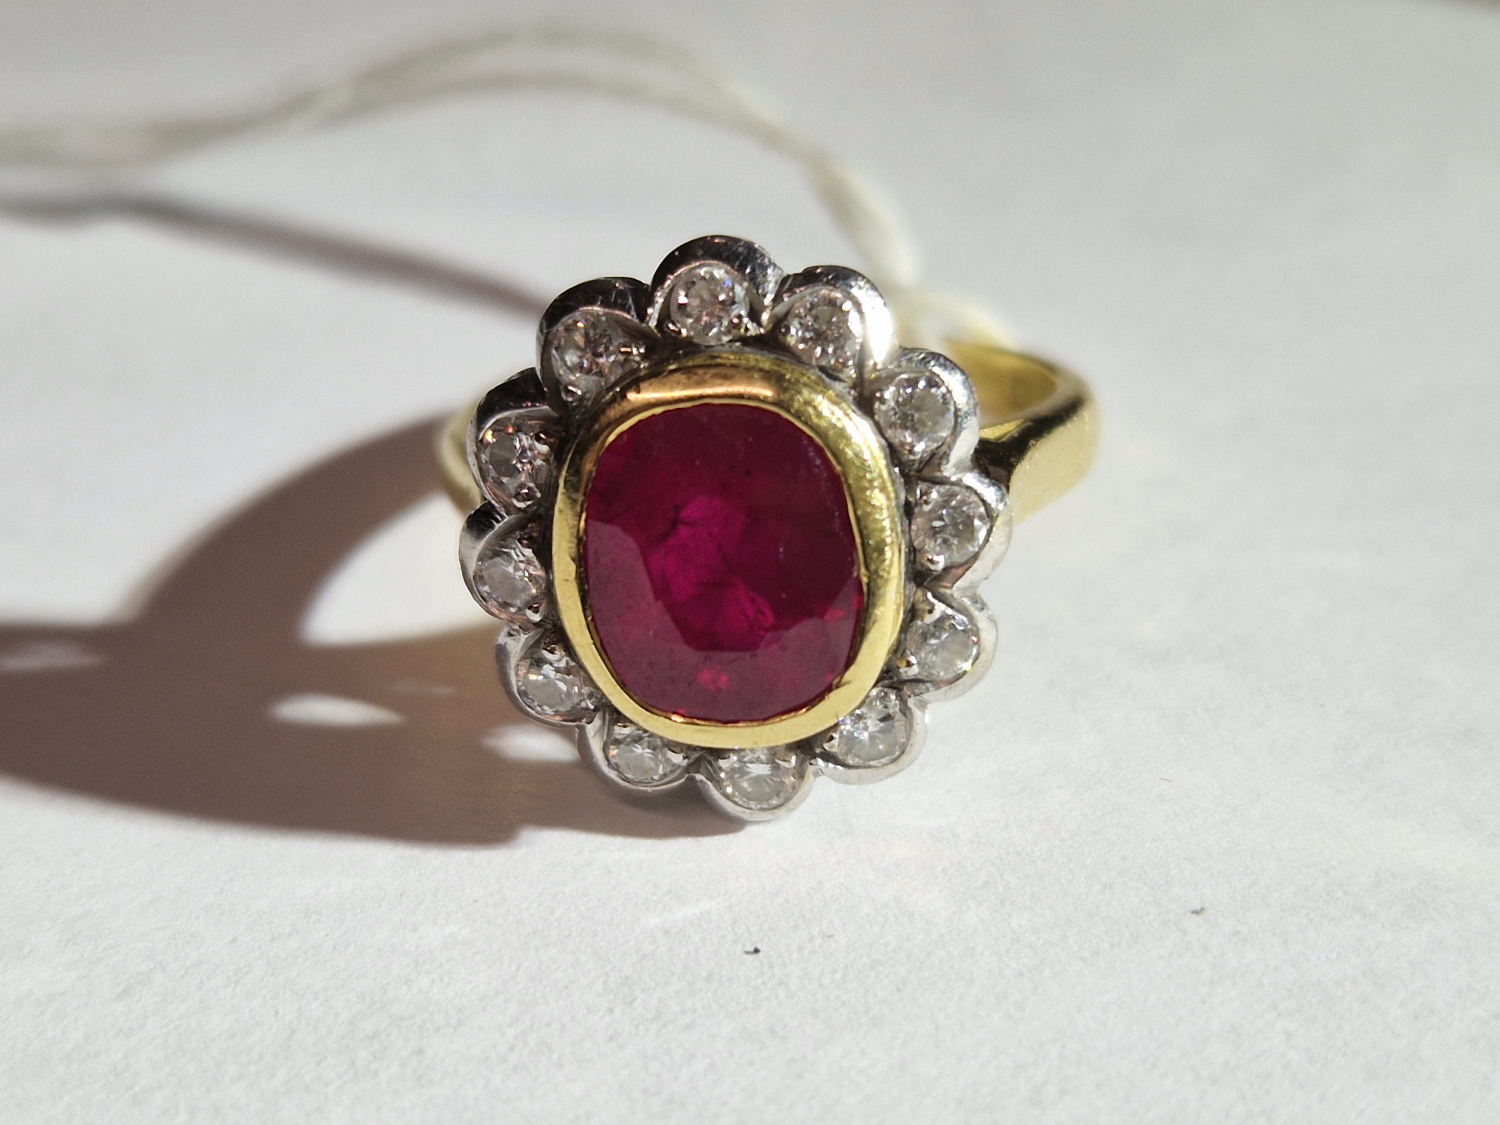 AN 18ct HALLMARKED GOLD RUBY AND DIAMOND OVAL SHAPED CLUSTER RING. THE SINGLE MEDIUM TO DARK - Image 15 of 20